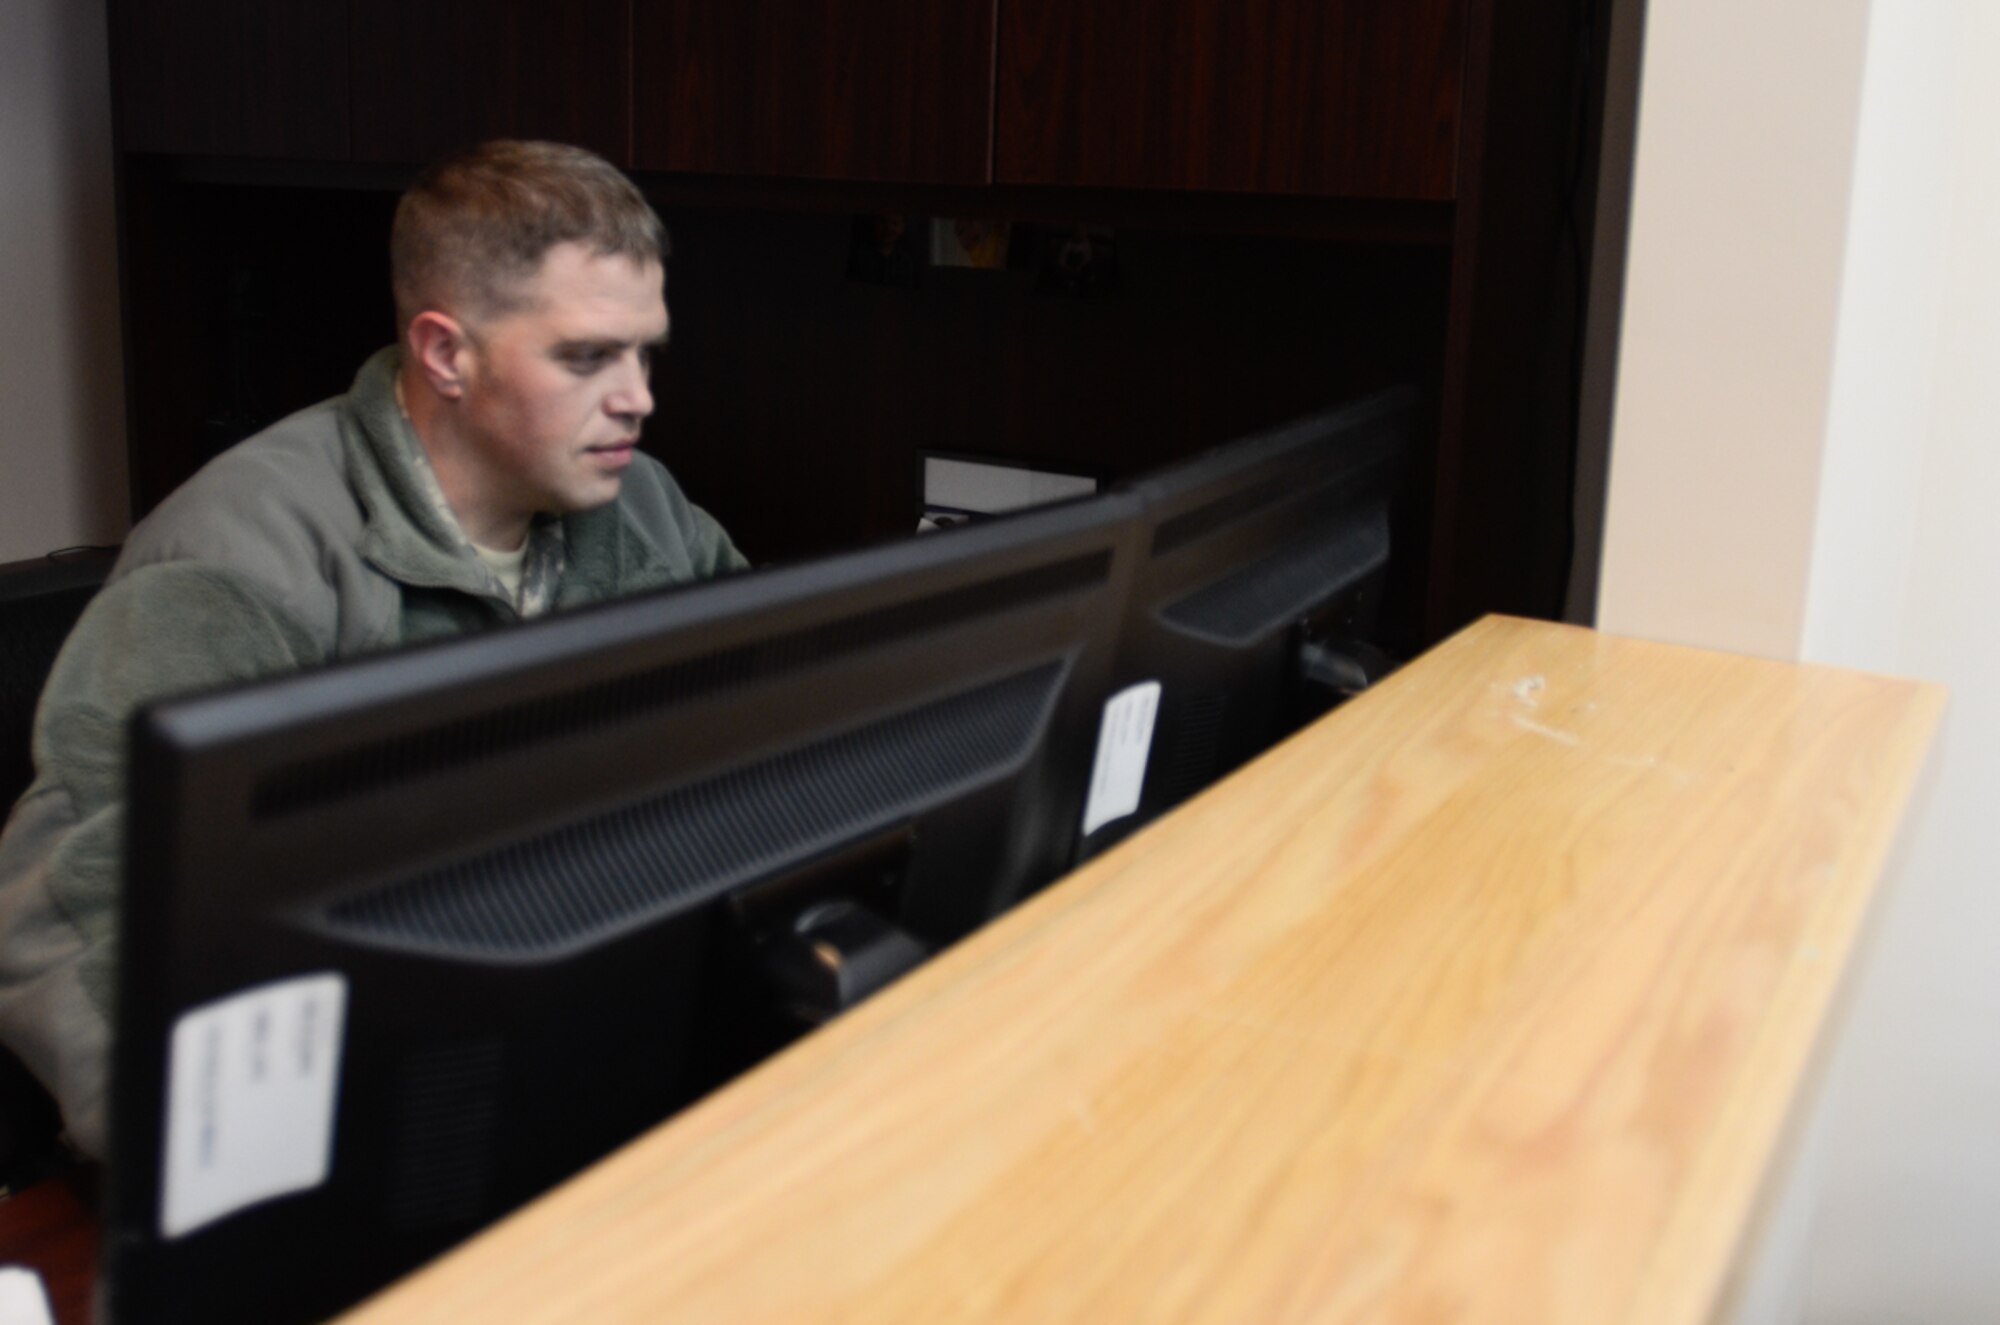 U.S. Air Force Tech. Sgt. Matt Martindell, assigned to the 139th Security Forces Squadron, Missouri Air National Guard, sits at the front desk at the 139th Airlift Wing’s new visitor center at Rosecrans Air National Guard Base, Mo., Jan. 3, 2014.  The Visitor Center issue visitor’s passes to non-base personnel after a background check. (U.S. Air National Guard photo by Tech. Sgt. Theo Ramsey/Released)